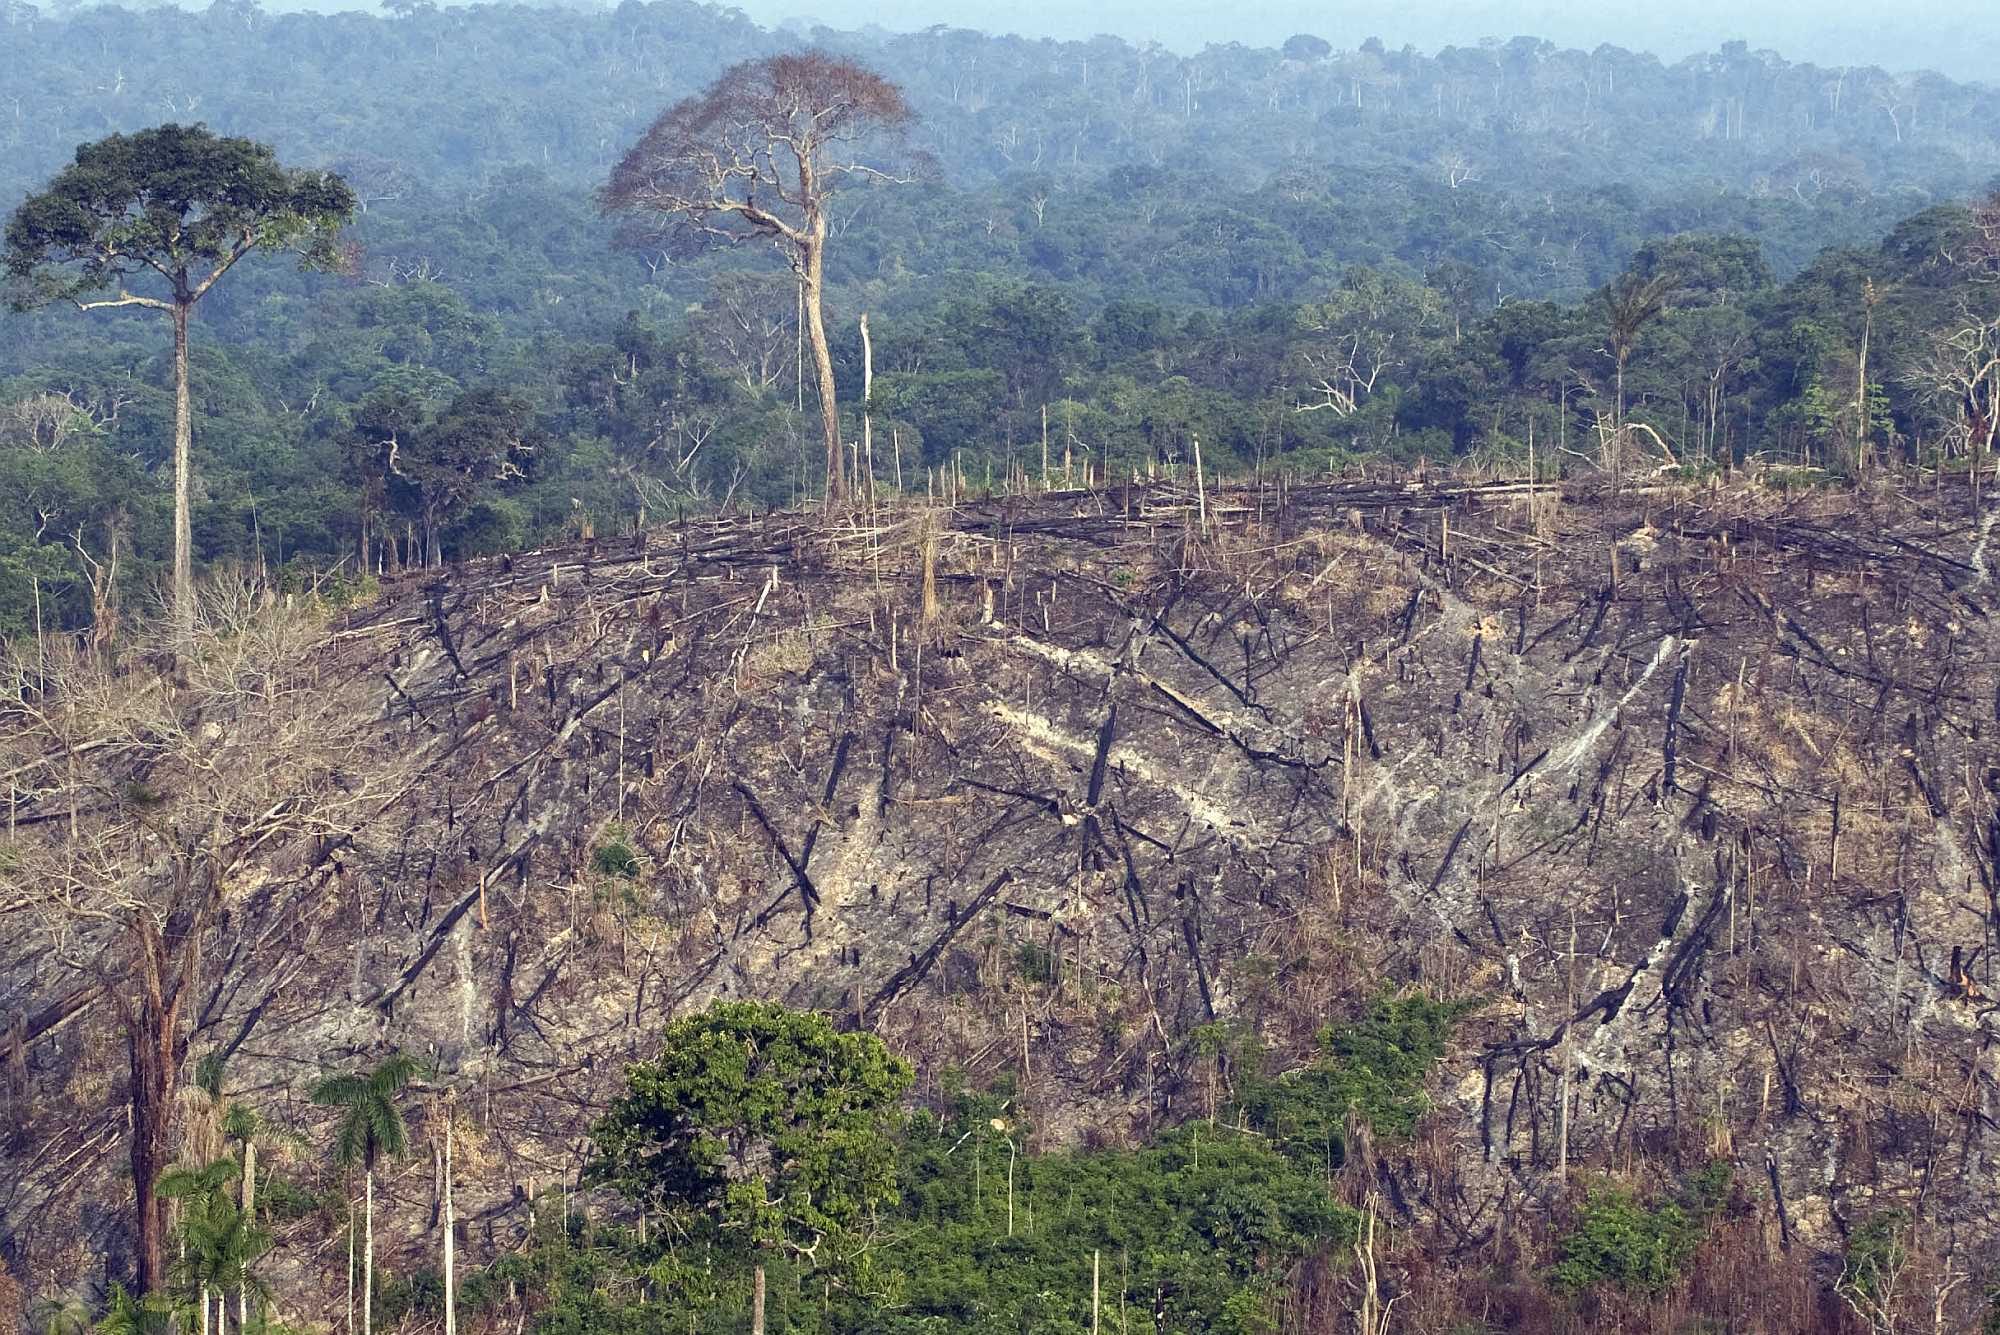 Burnt out area of the Jamanxim National Forest in the Amazon state of Pará - Photo: Antonio Scorza